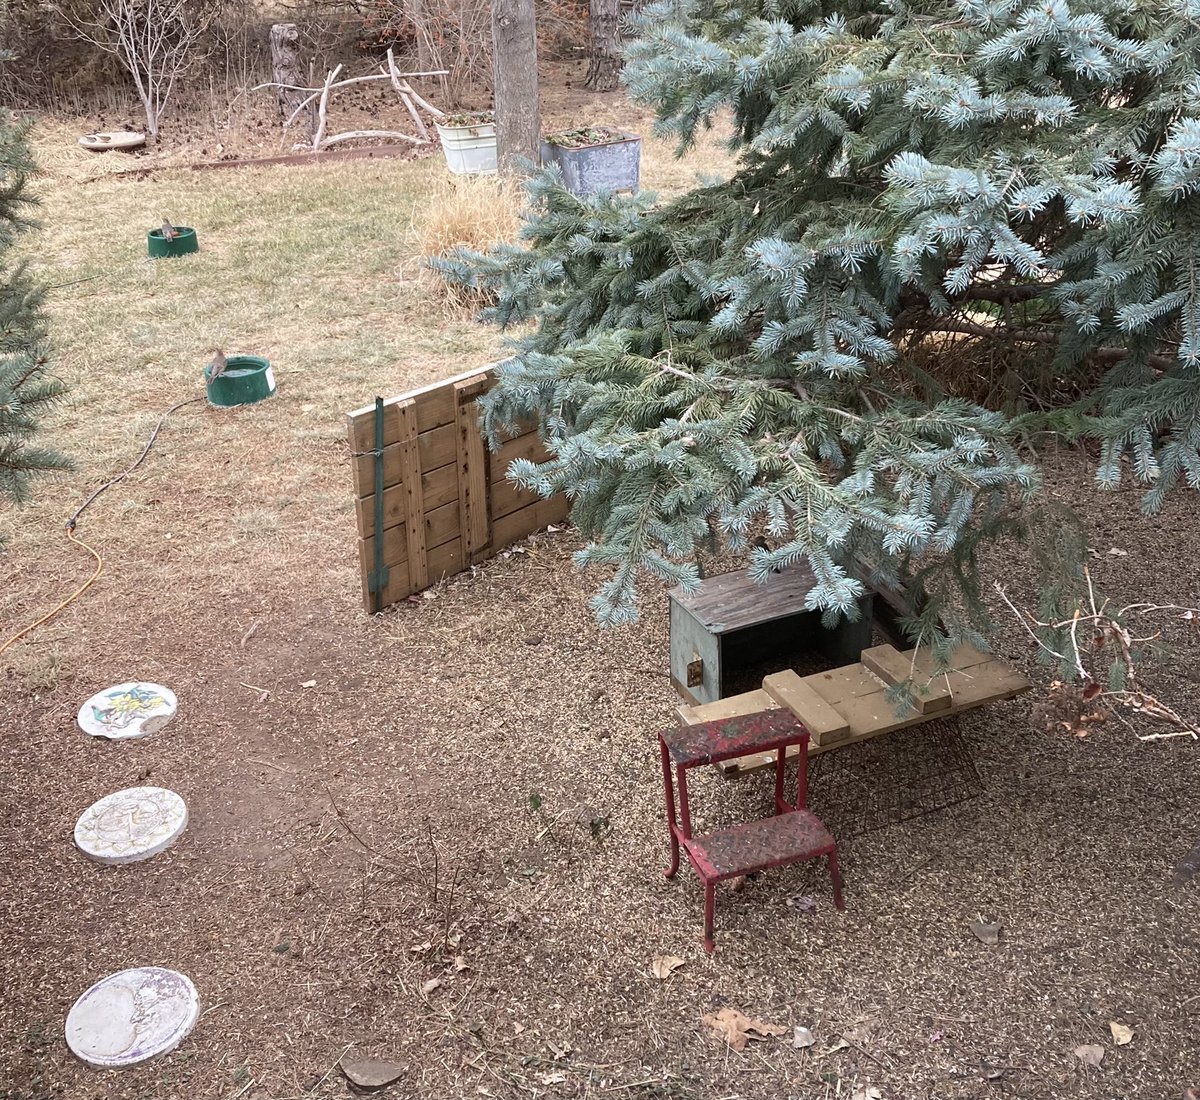 My mom built a bird playground outside her kitchen window. It has a windbreak, two heated bowls, a second food dish in the distance, and a wire basket for the small birds to eat inside and keep the blackbirds out. https://t.co/xYVE5Y9J0z